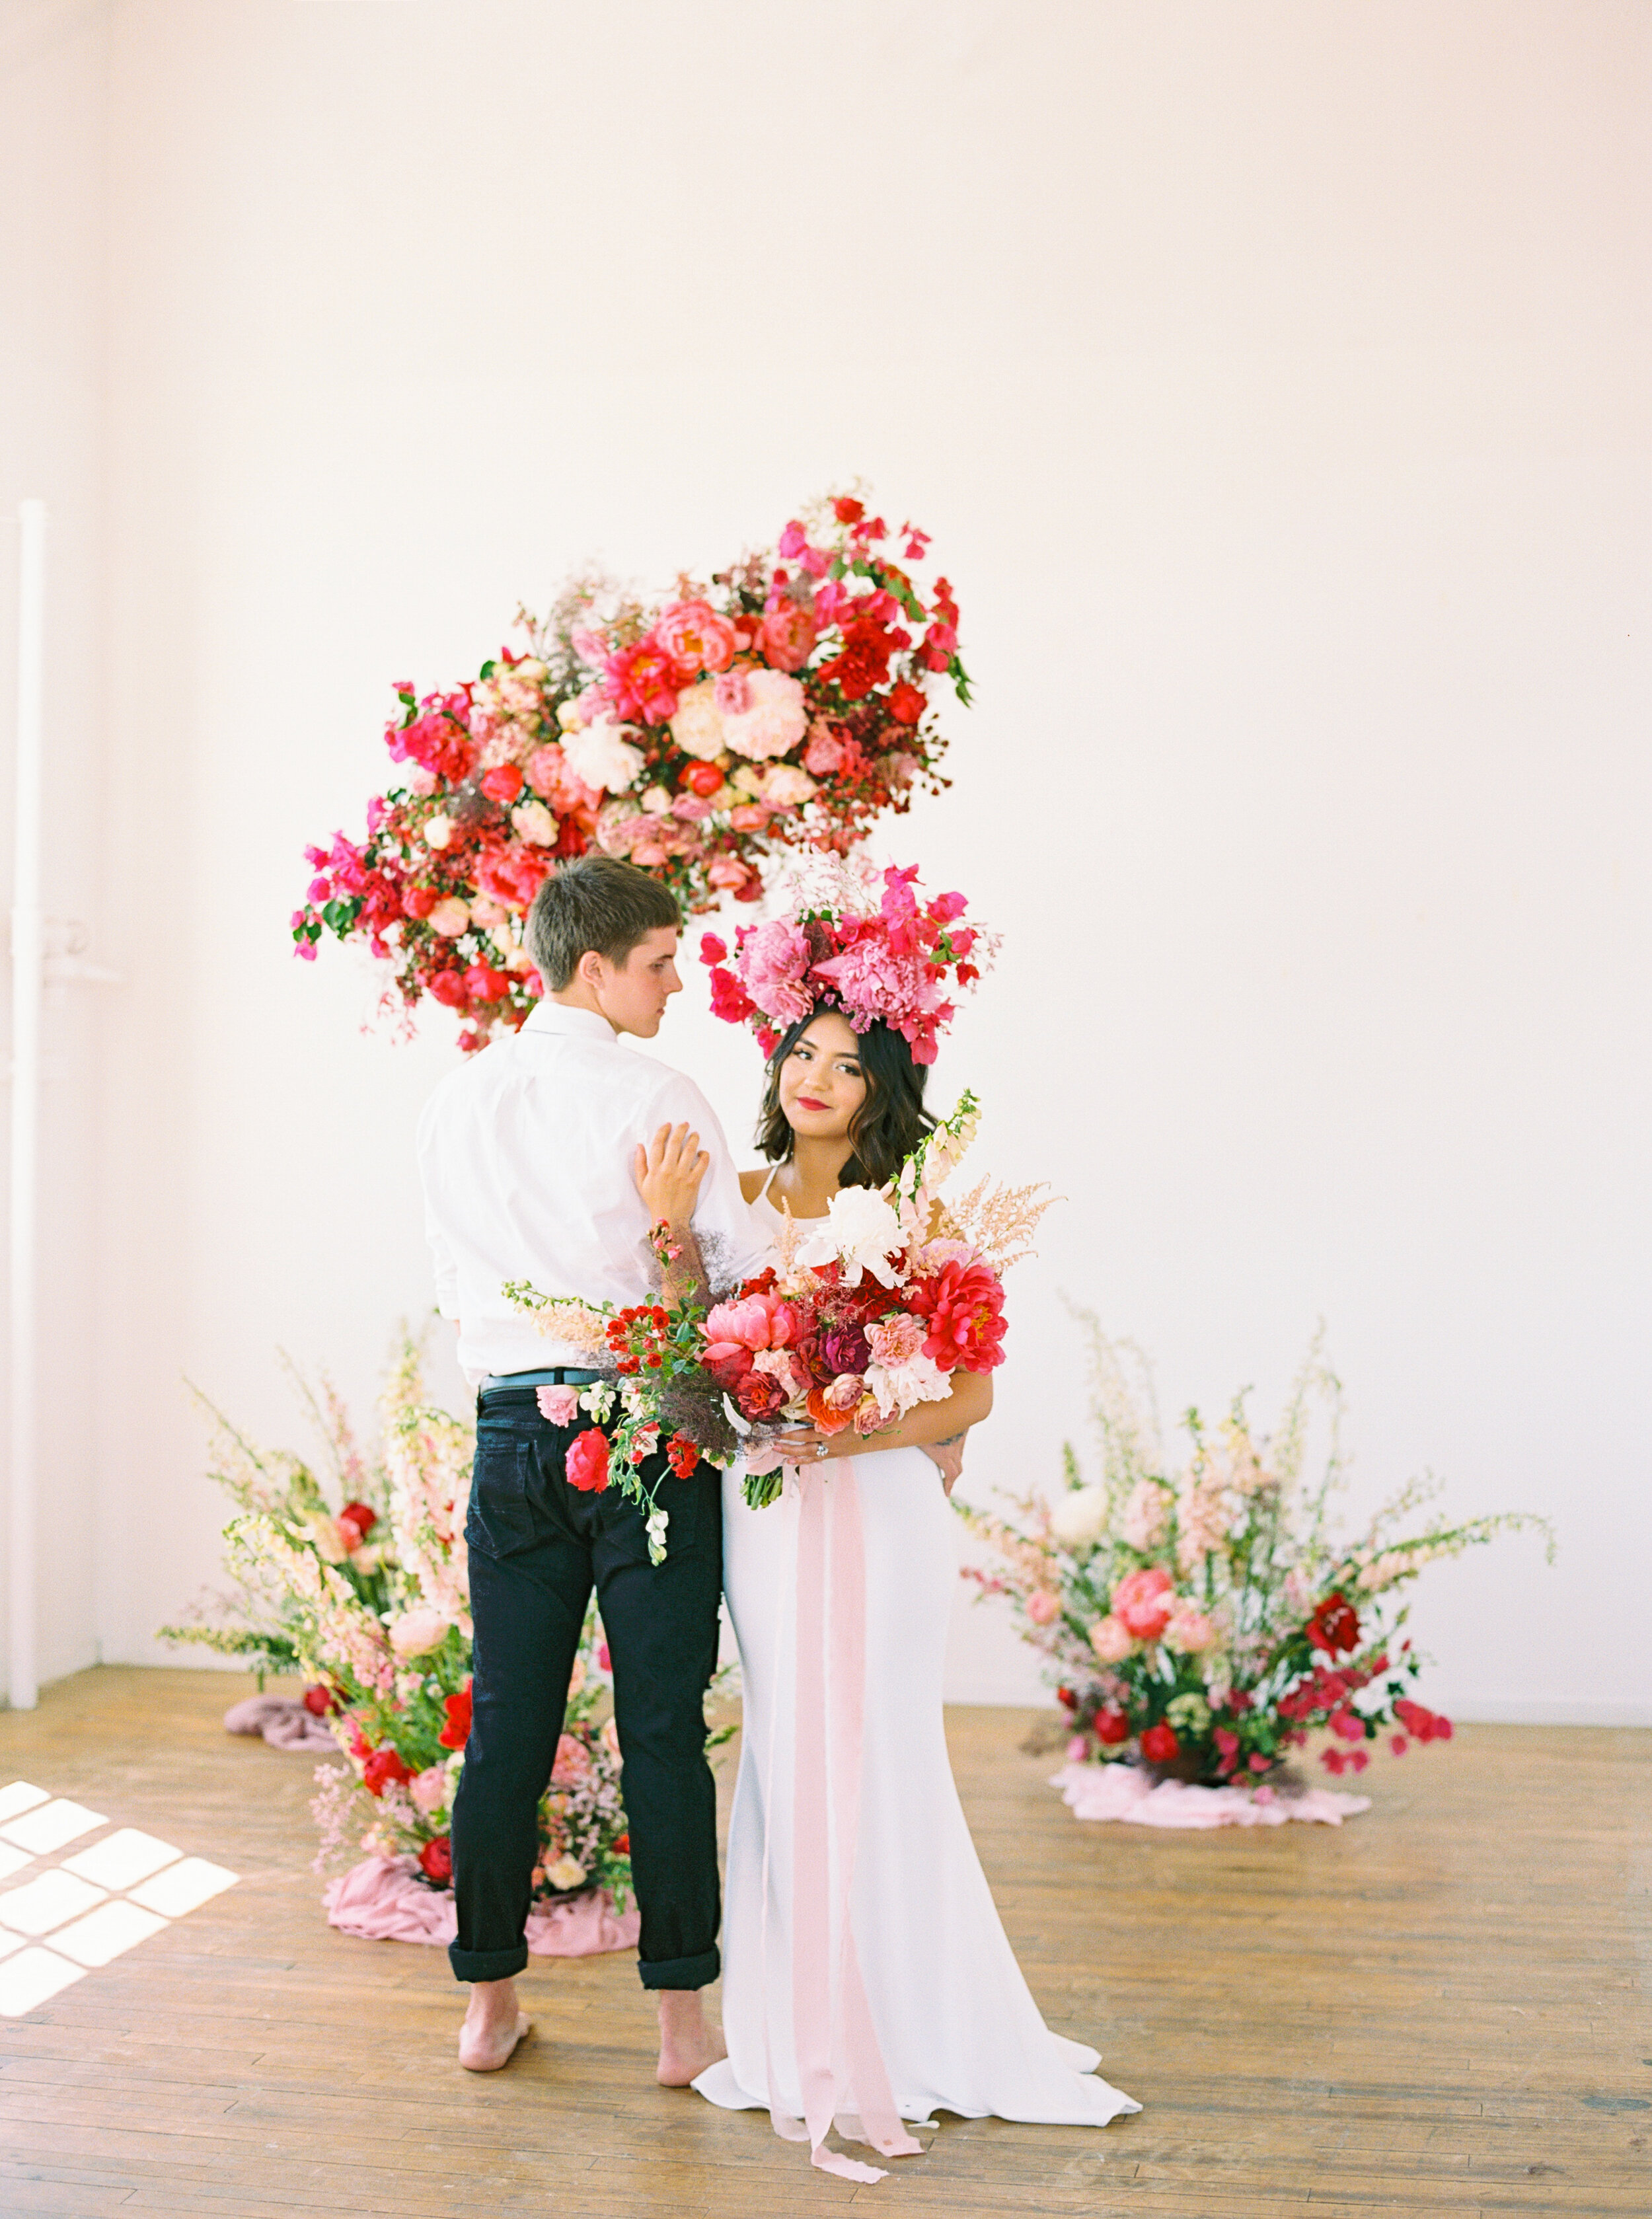 A Romantic Wedding Elopement Filled with Colorful Fuchsia - Sarahi Hadden Submission-35.jpg